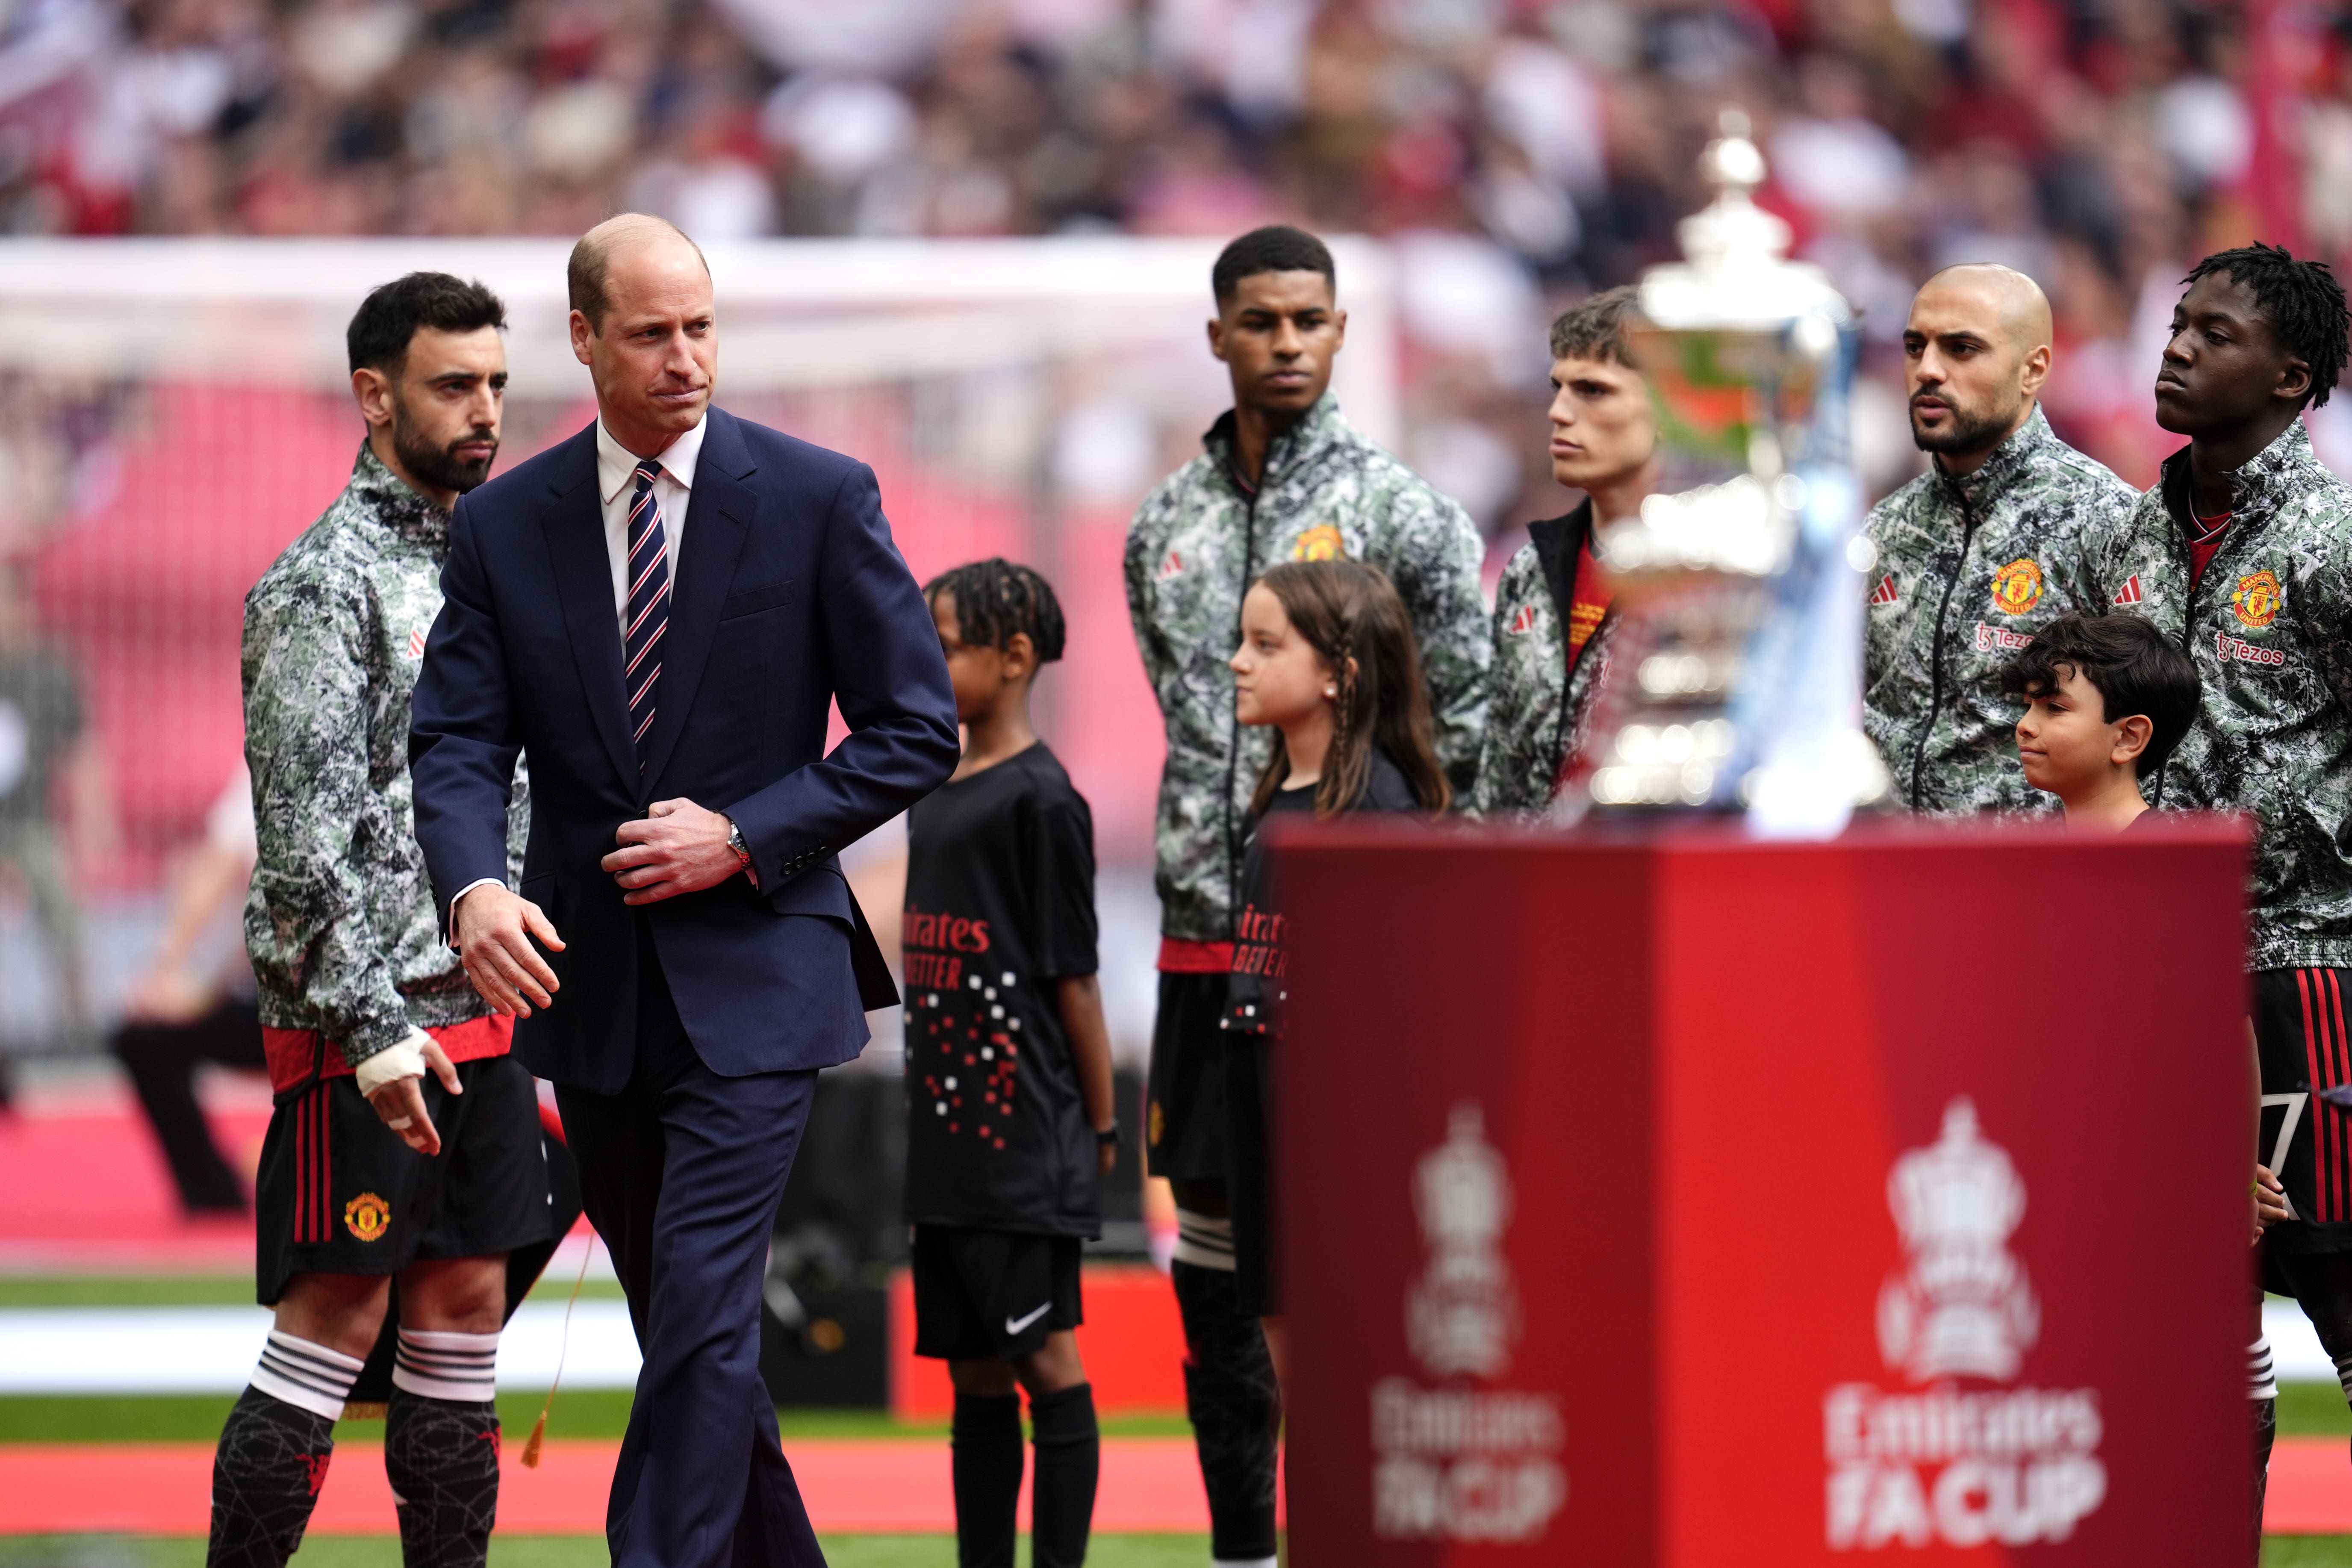 Prince William met the players before kick-off.